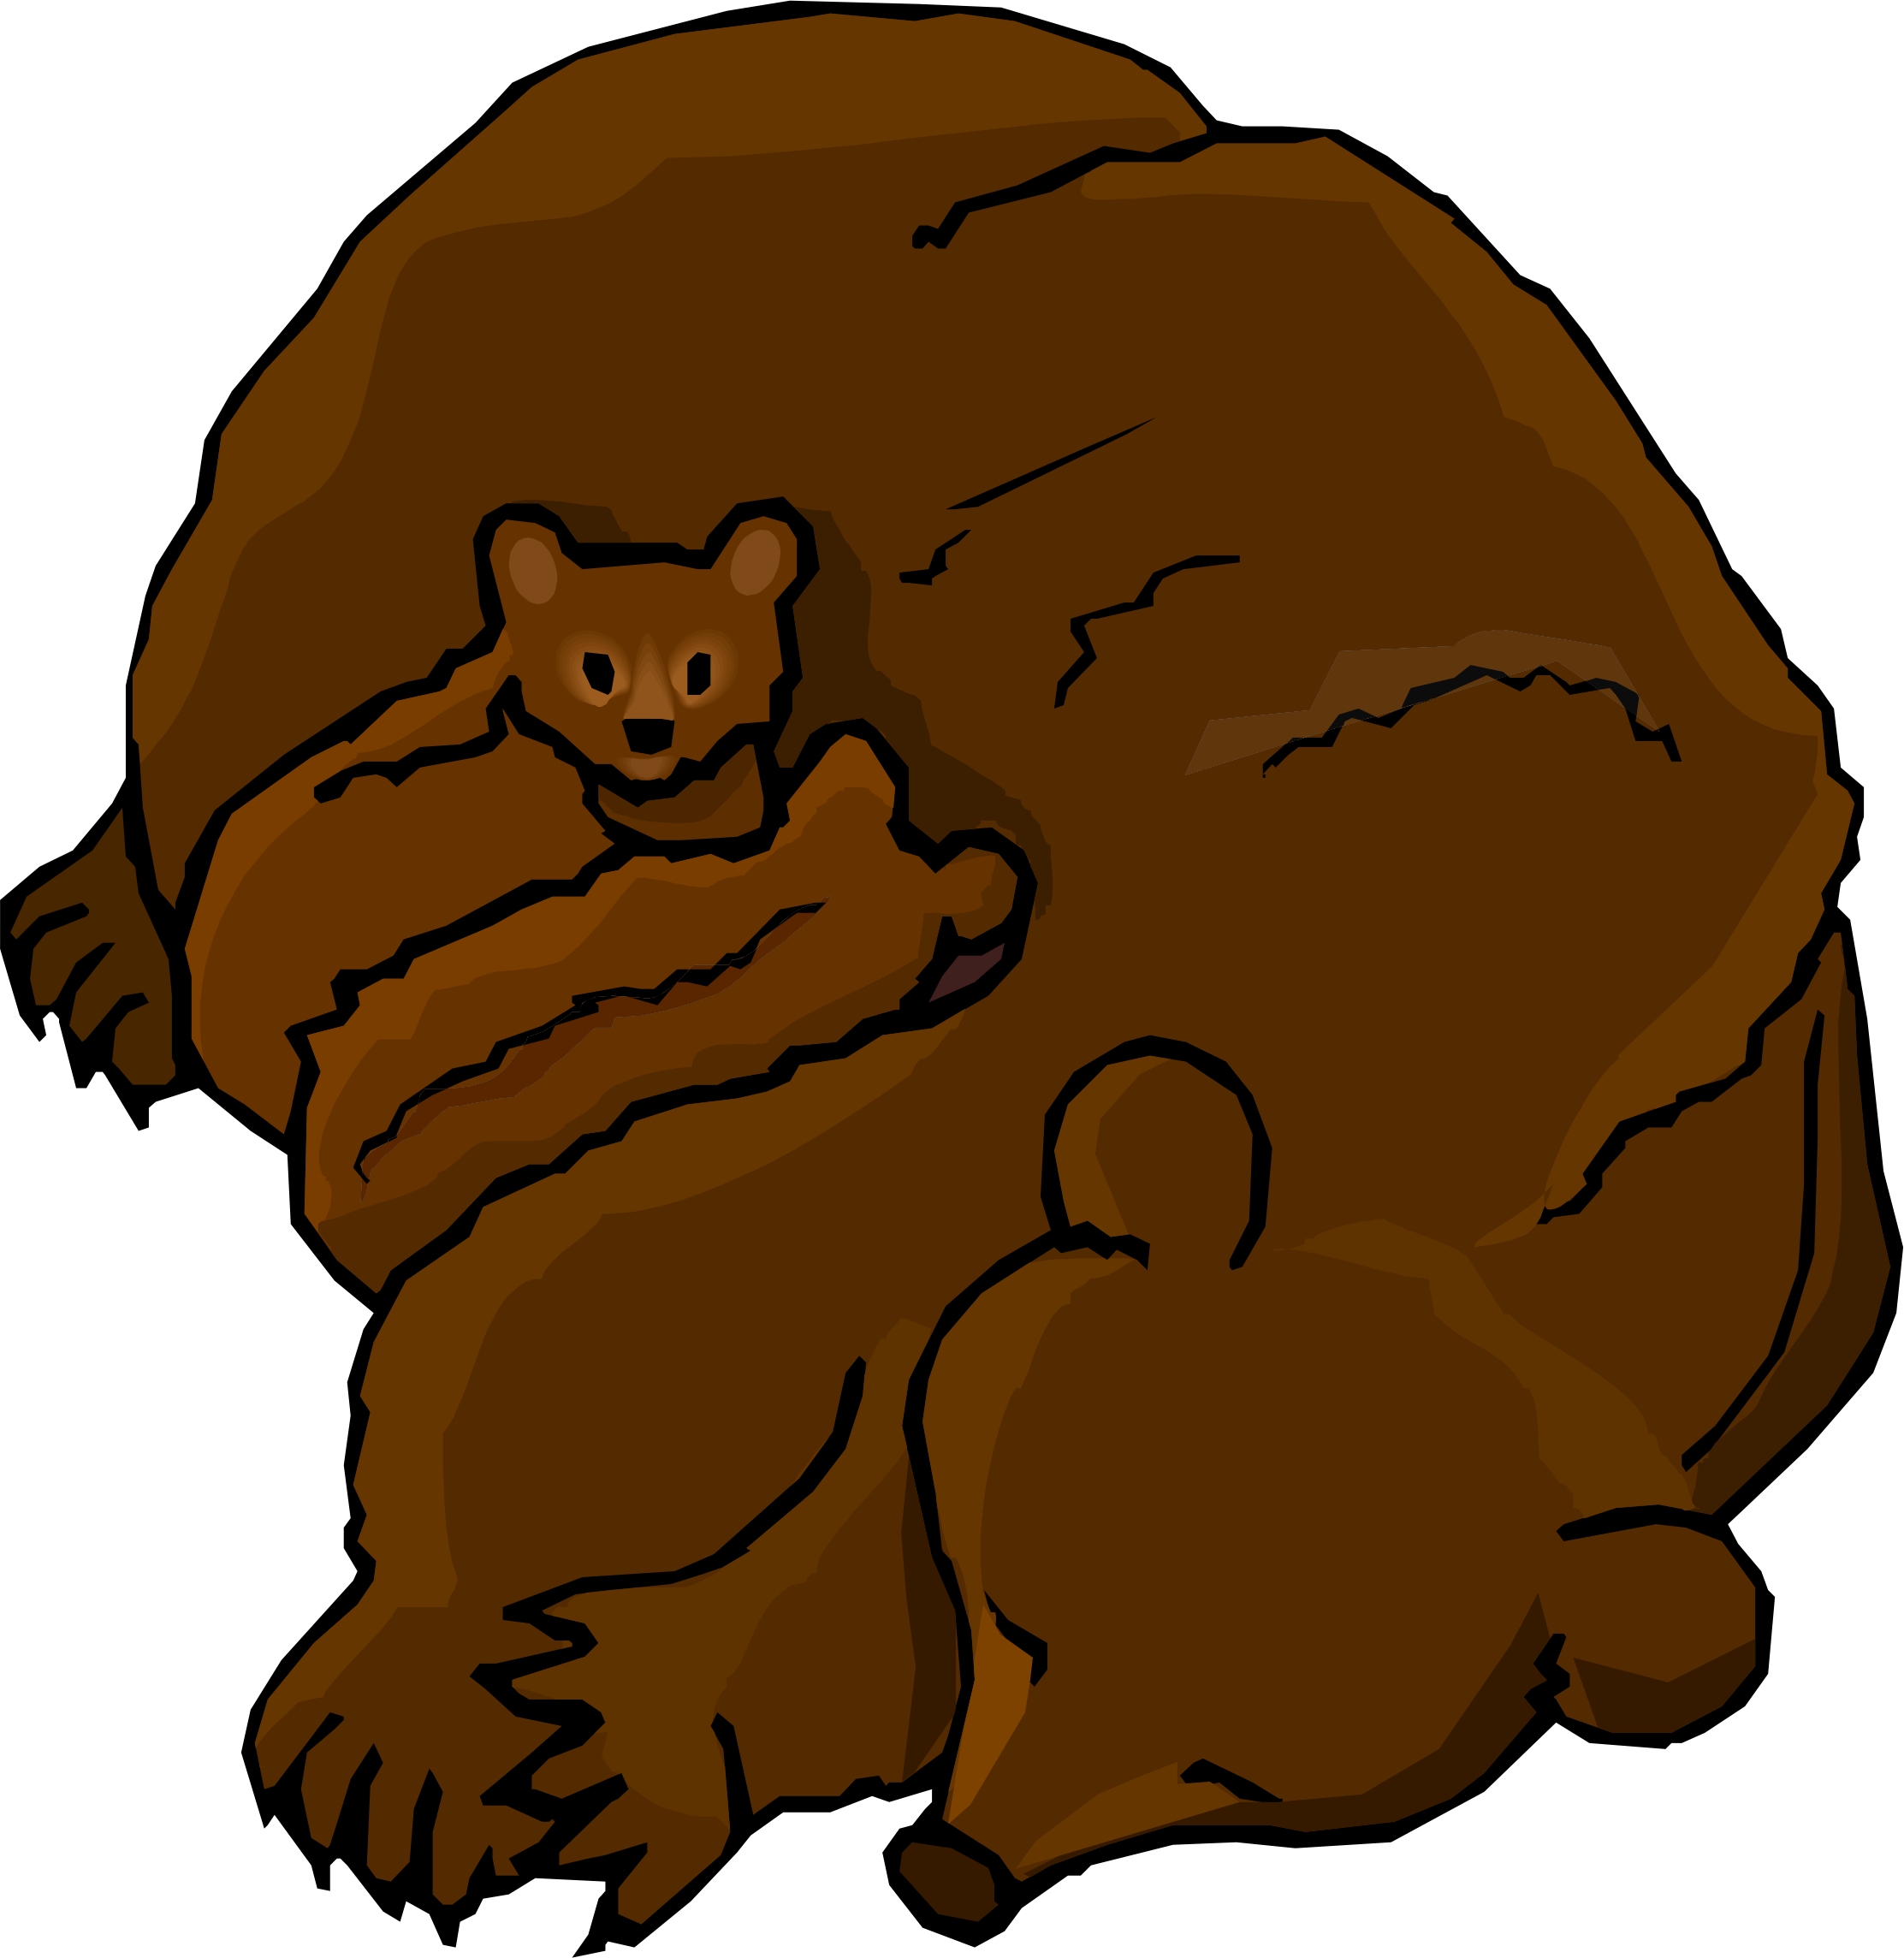 Grizzly bear bear clip art grizzly clipart for you image 3 ...